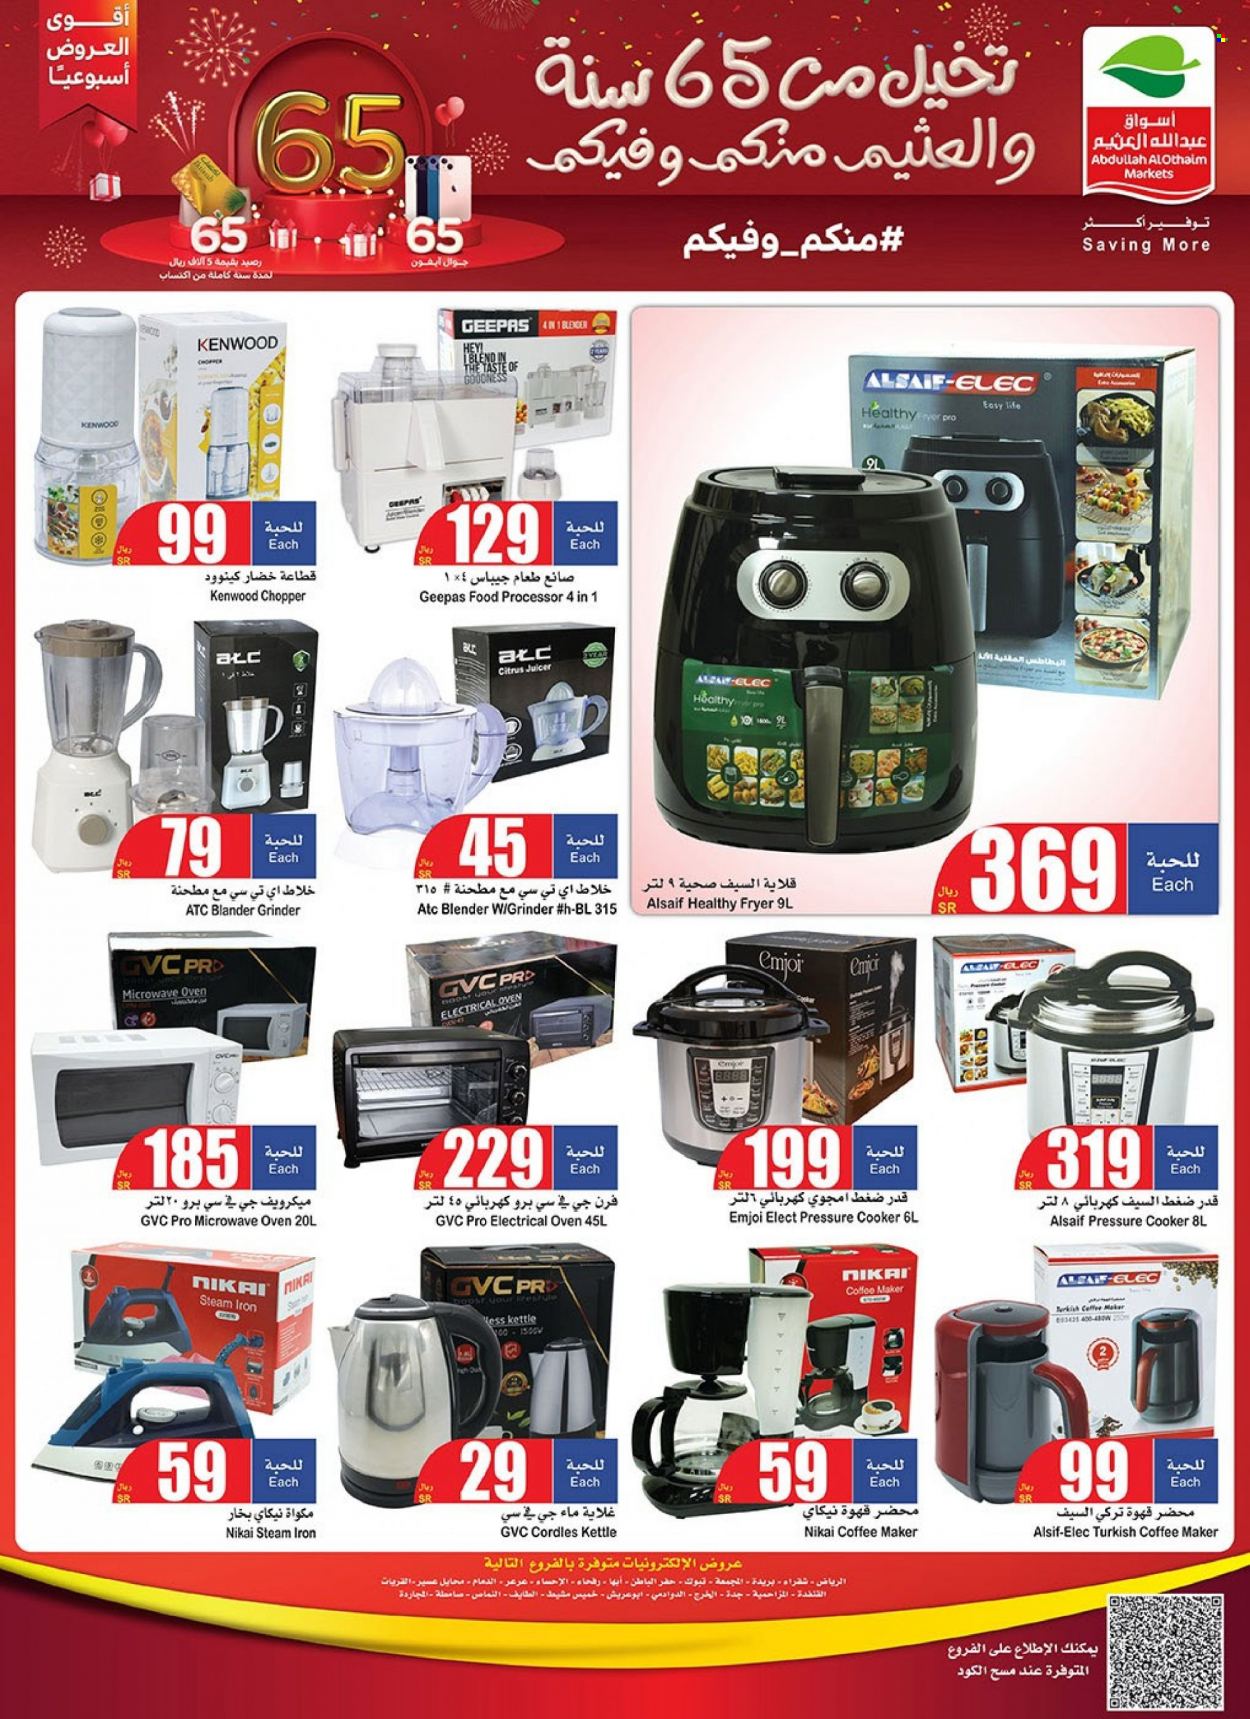 <retailer> - <MM.DD.YYYY - MM.DD.YYYY> - Sales products - ,<products from offers>. Page 34.